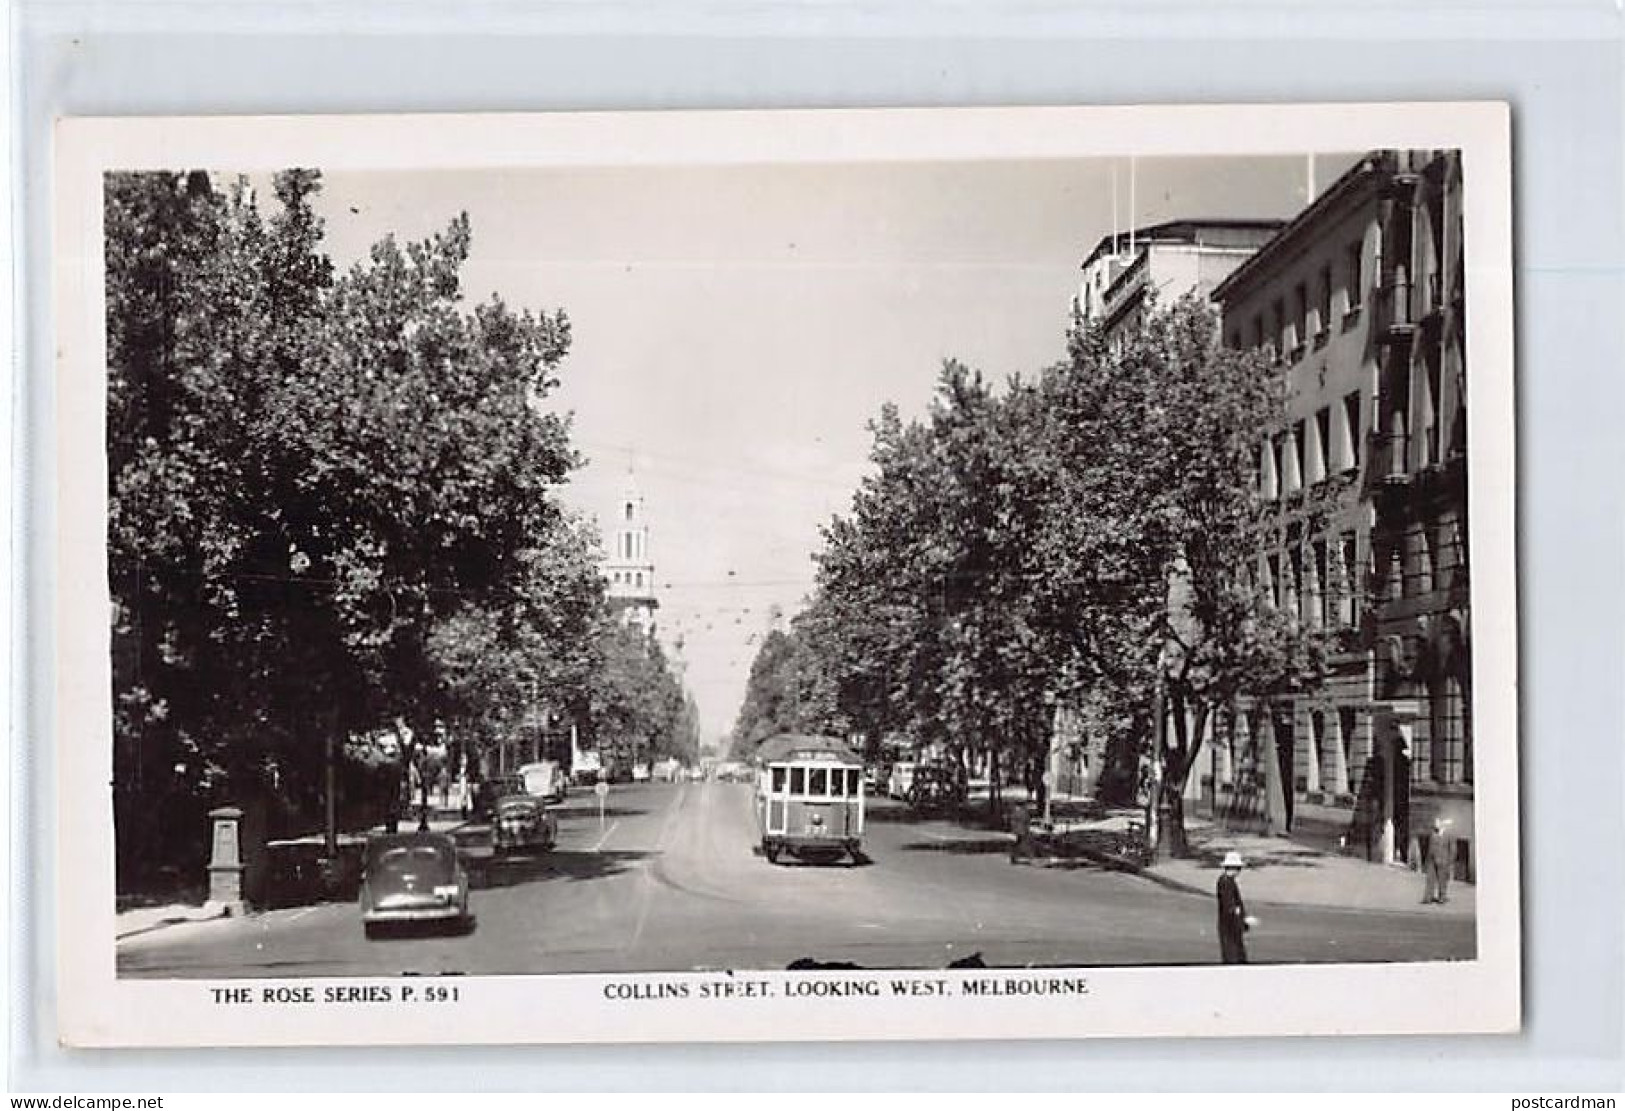 MELBOURNE (VIC) Collins Street, Looking West - Publ. The Rose Series 591 - Melbourne